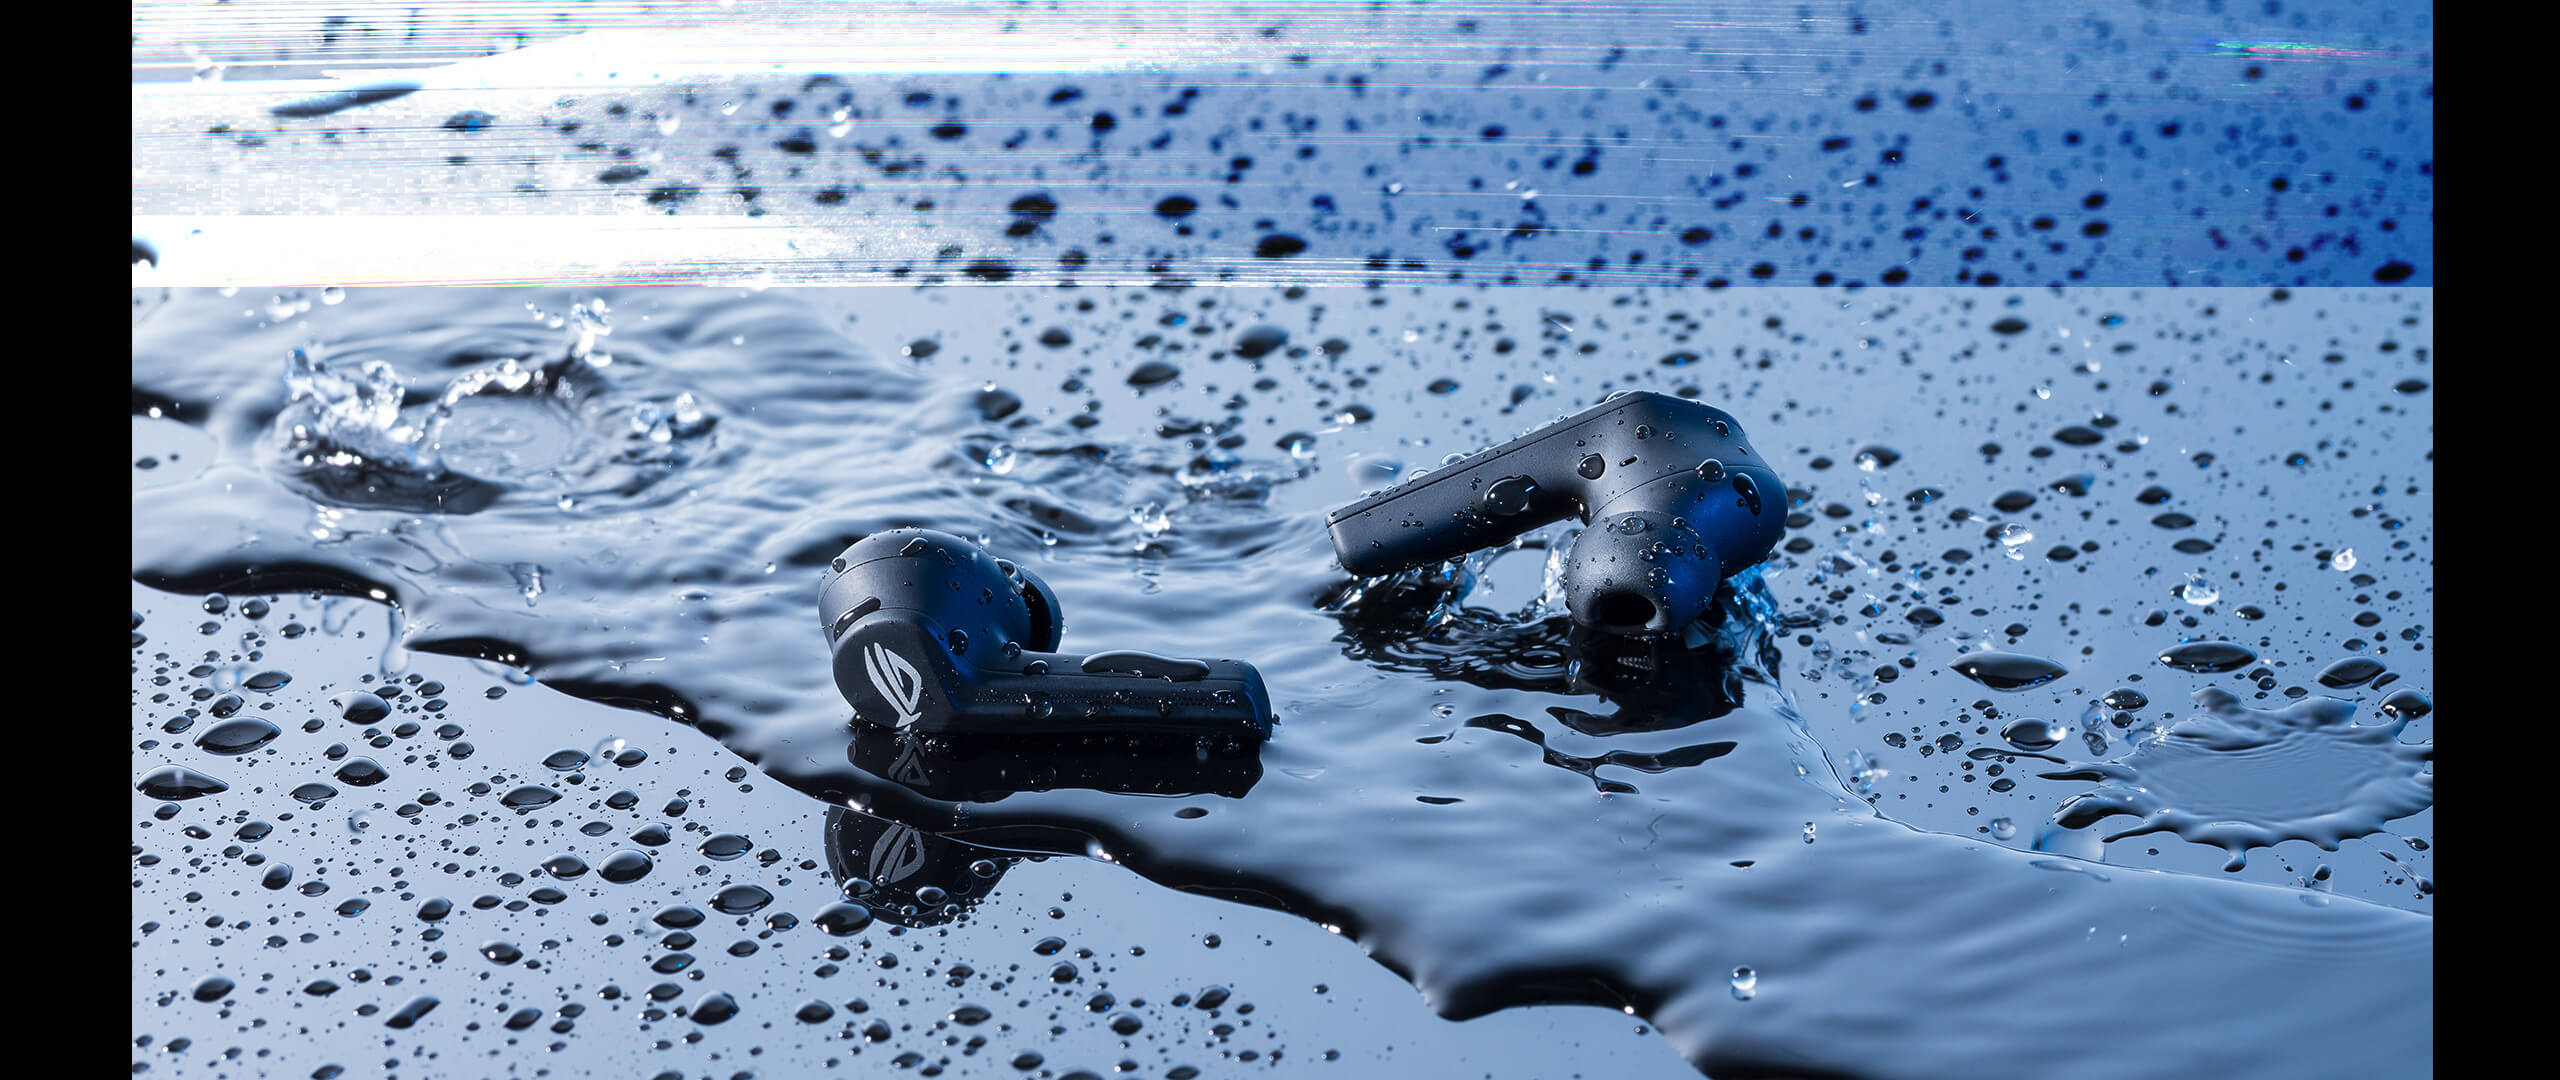 The ROG Cetra True Wireless Earbuds are lying in a puddle of water to demonstrate water resistance